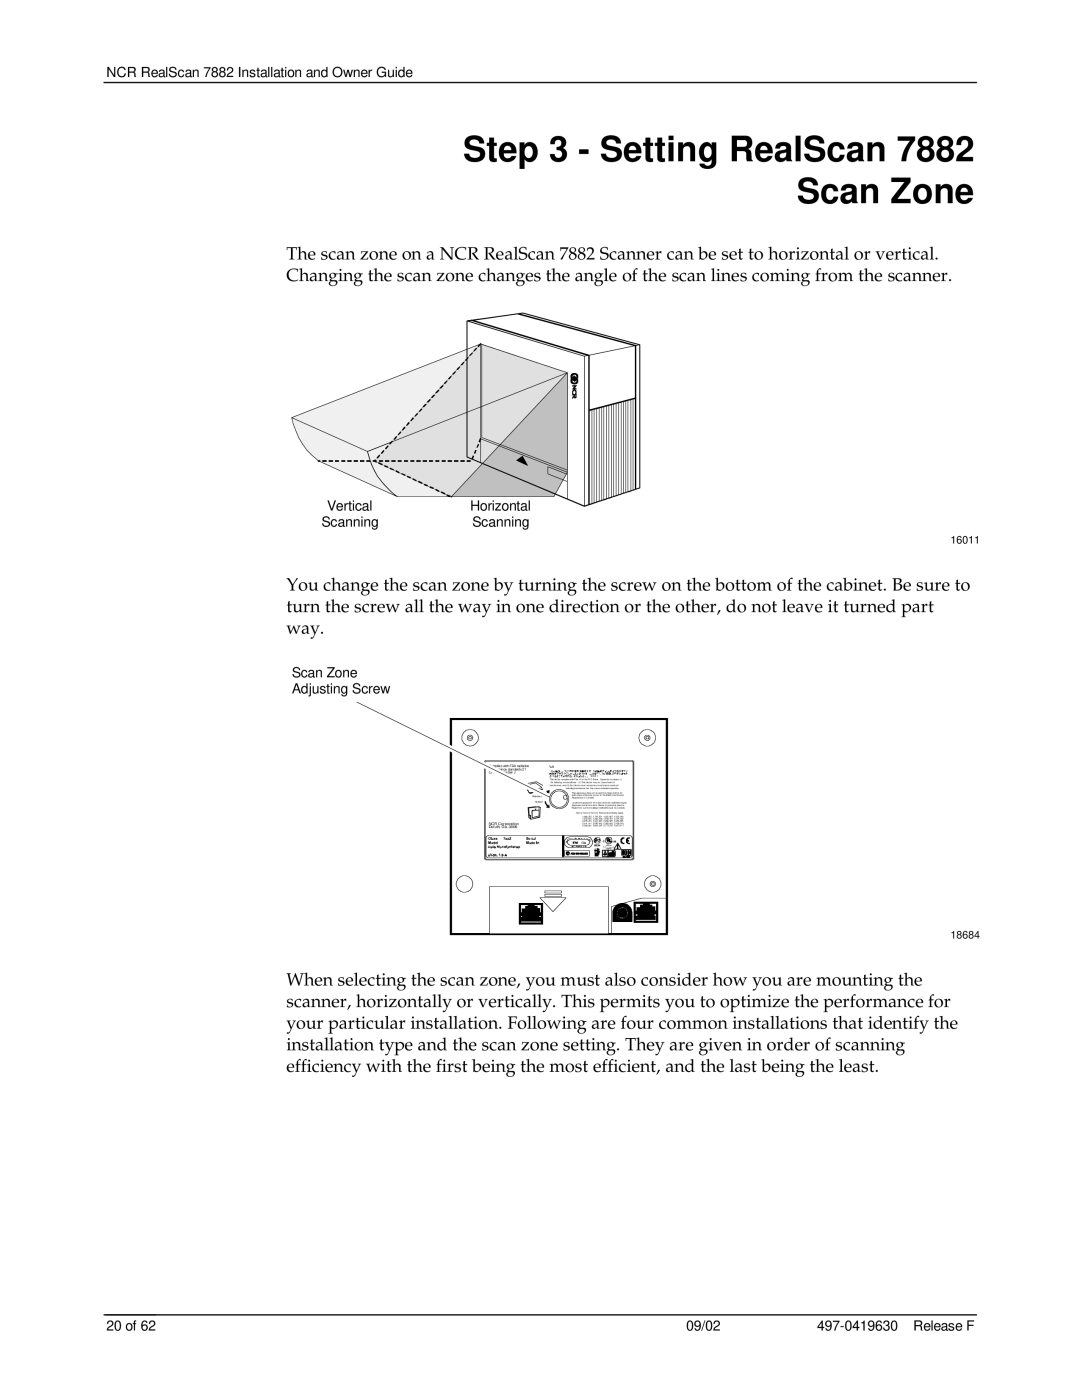 NCR 7882 manual Setting RealScan Scan Zone, Scan Zone Adjusting Screw 